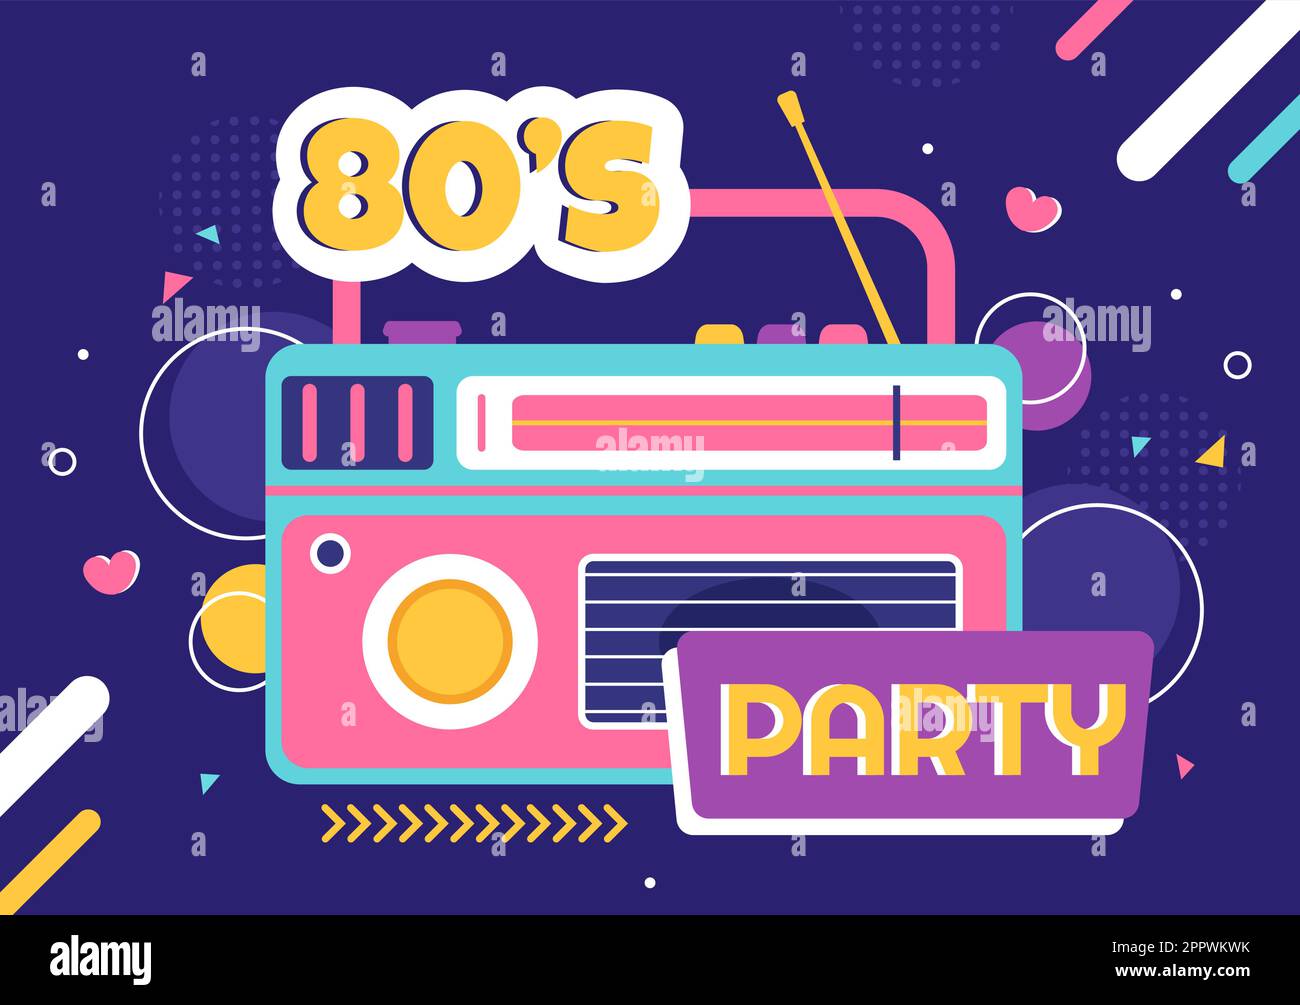 80s Party Cartoon Background Illustration with Retro Music, 1980 Radio Cassette Player and Disco in Old Style Design Stock Vector